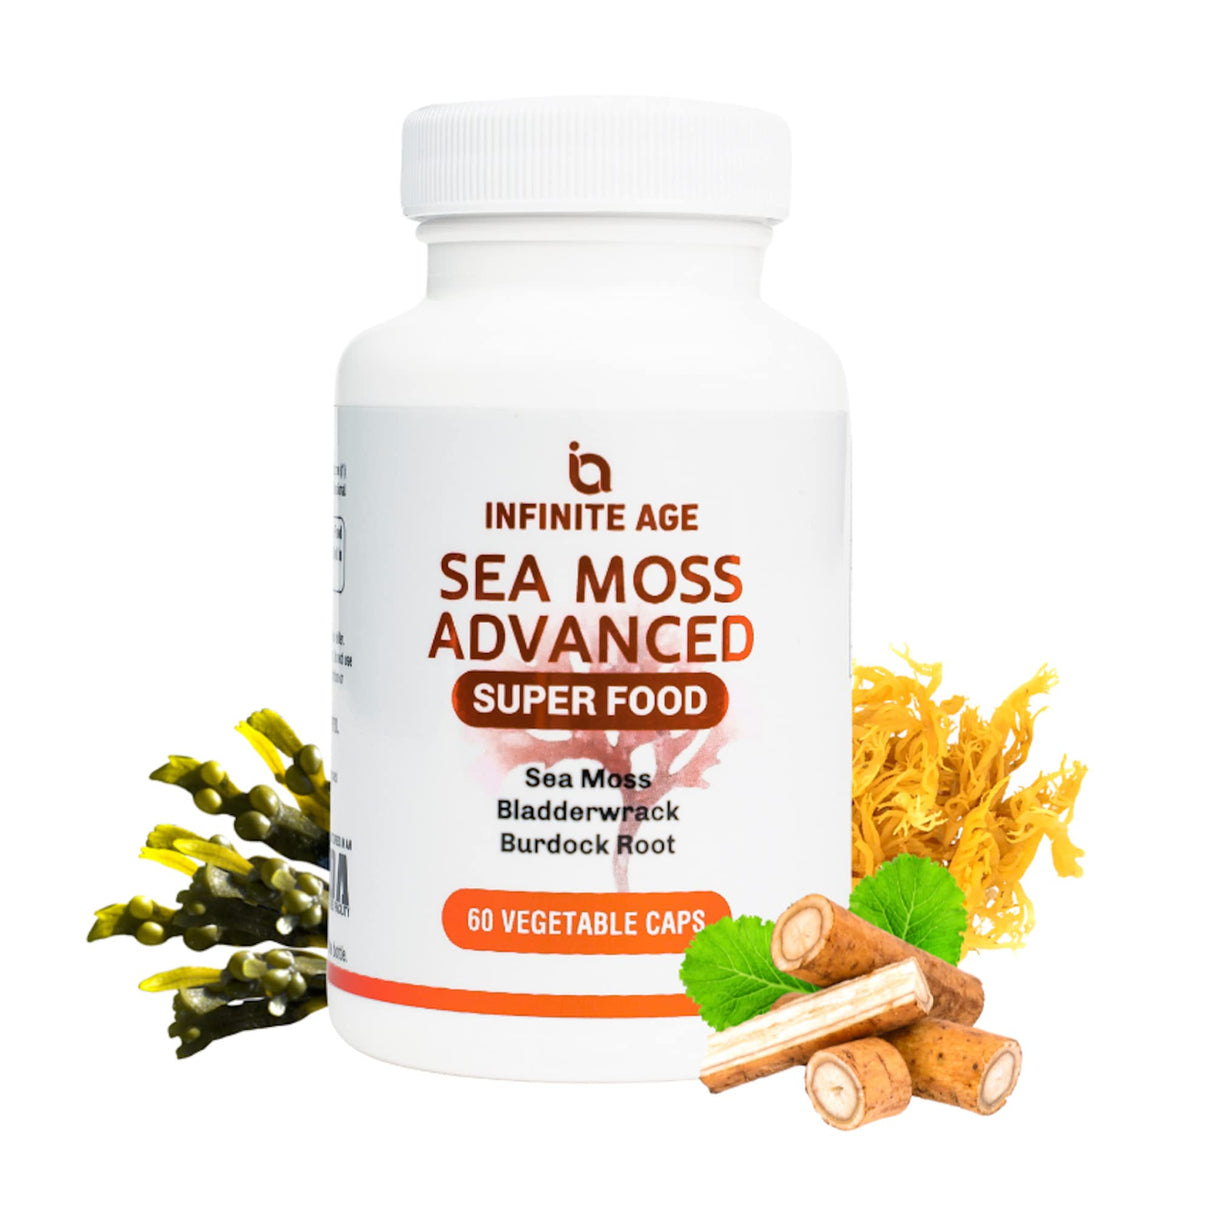 INFINITE AGE: Sea Moss Advanced - High-Potency Vegan Superfood with Bladderwrack and Burdock Root - 60 Capsules - Overall Health and Immunity Support - Made in The USA - Purity Transparency